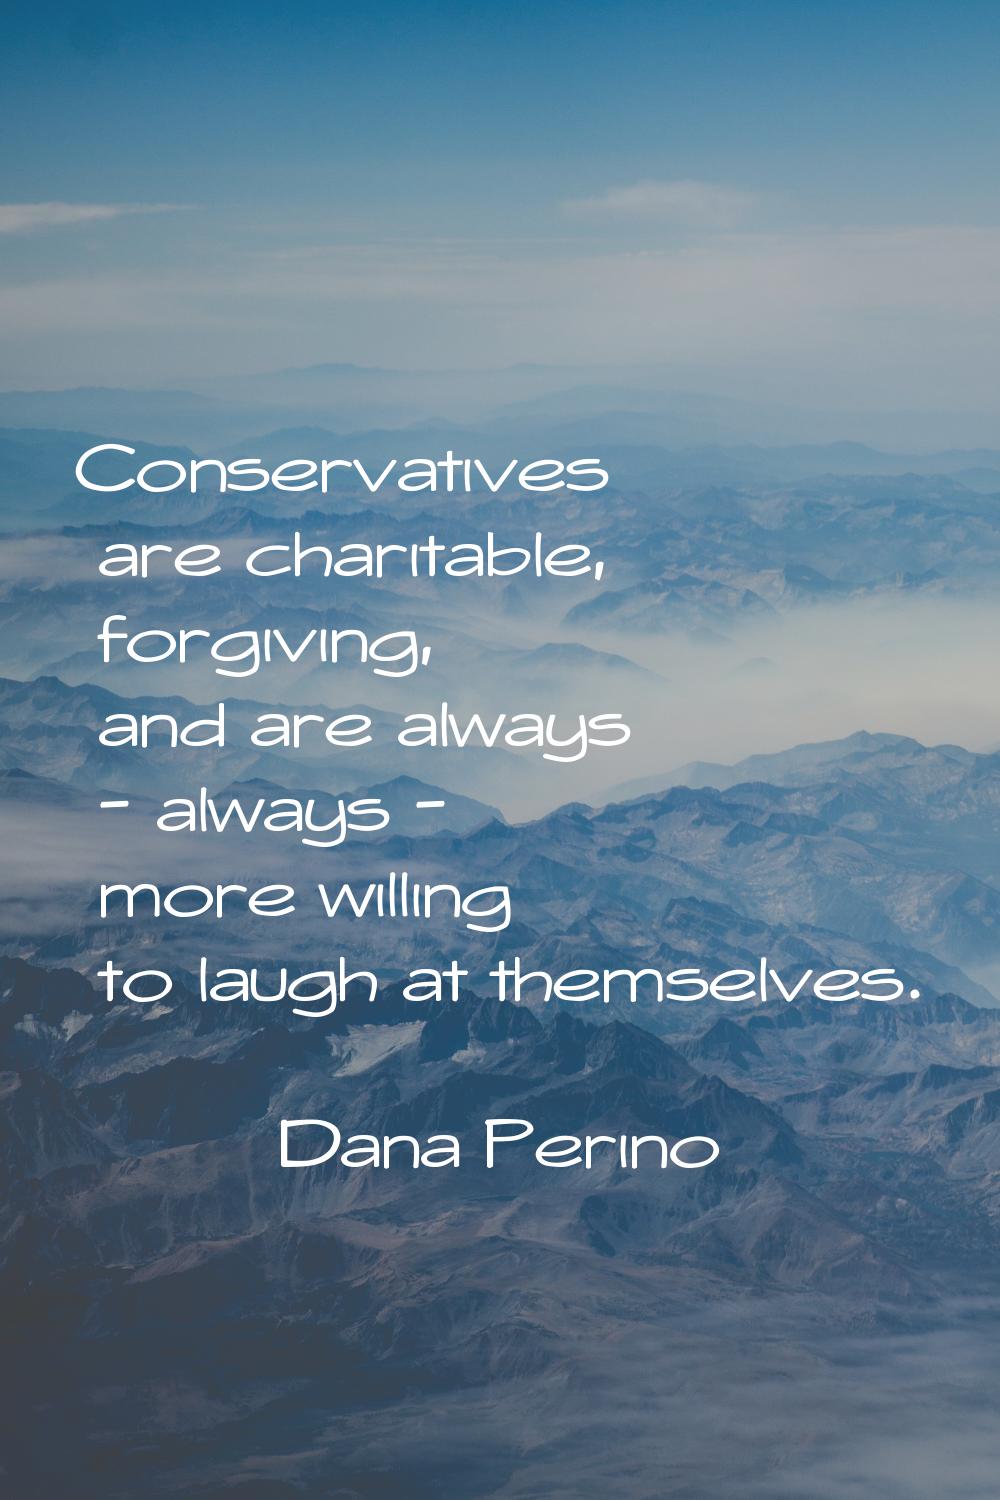 Conservatives are charitable, forgiving, and are always - always - more willing to laugh at themsel